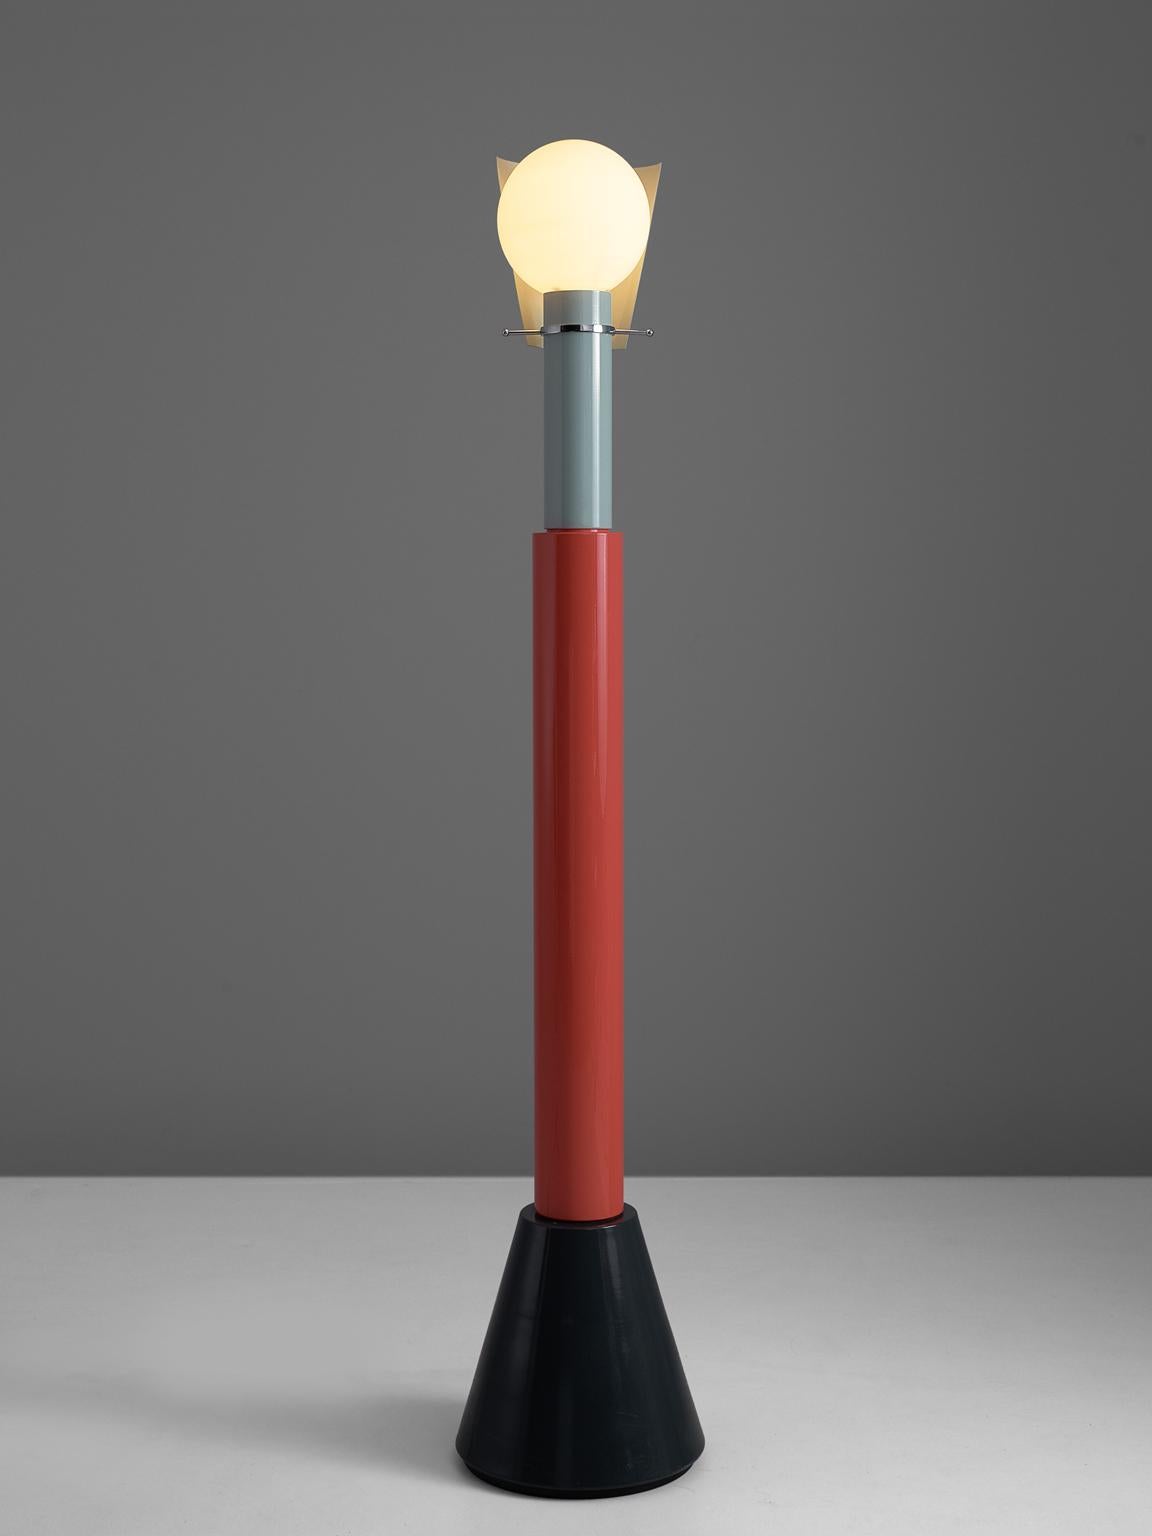 Alessandro Mendini for Segno, floor lamp 'Milo', enameled metal and glass, by Italy, 1982. 

Flighty floor lamp designed by Alessandro Mendini in 1982, in the style of Memphis. This lamp is a simplified representation of a male figure. Black base